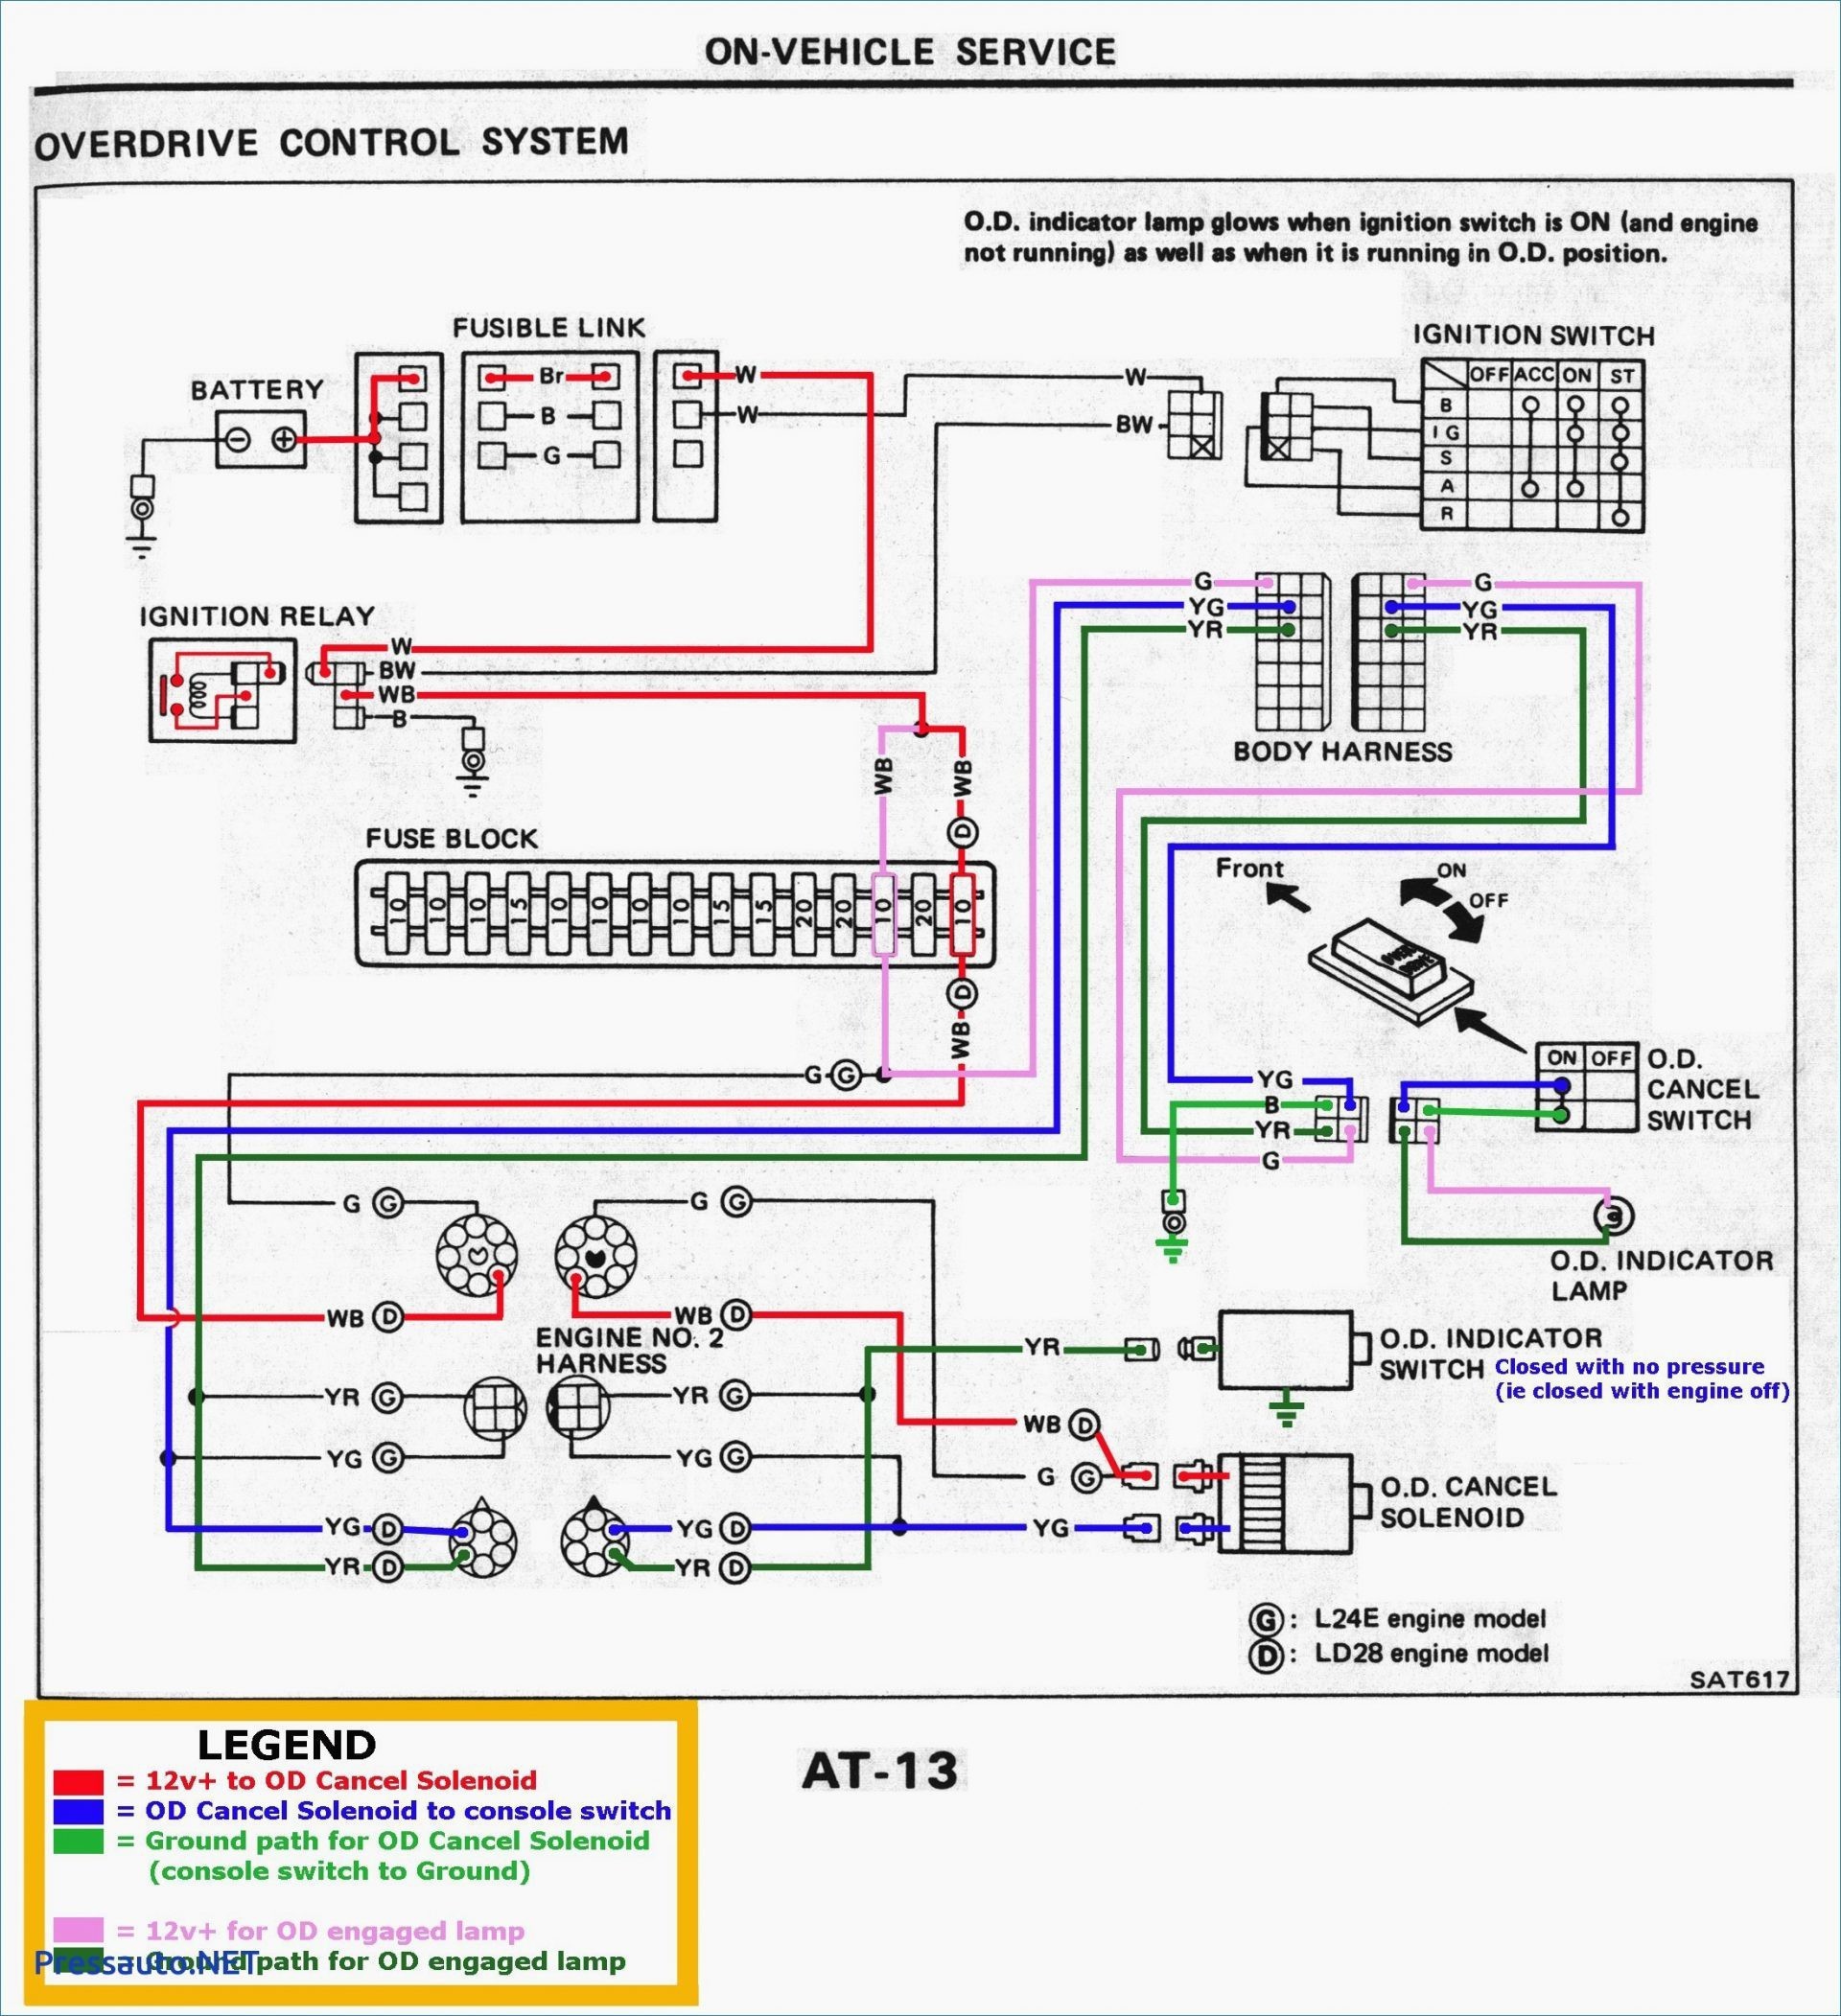 How To Wire 3 Lights To e Switch Diagram Fresh 2019 Wiring Diagram For Two Lights E Switch Joescablecar